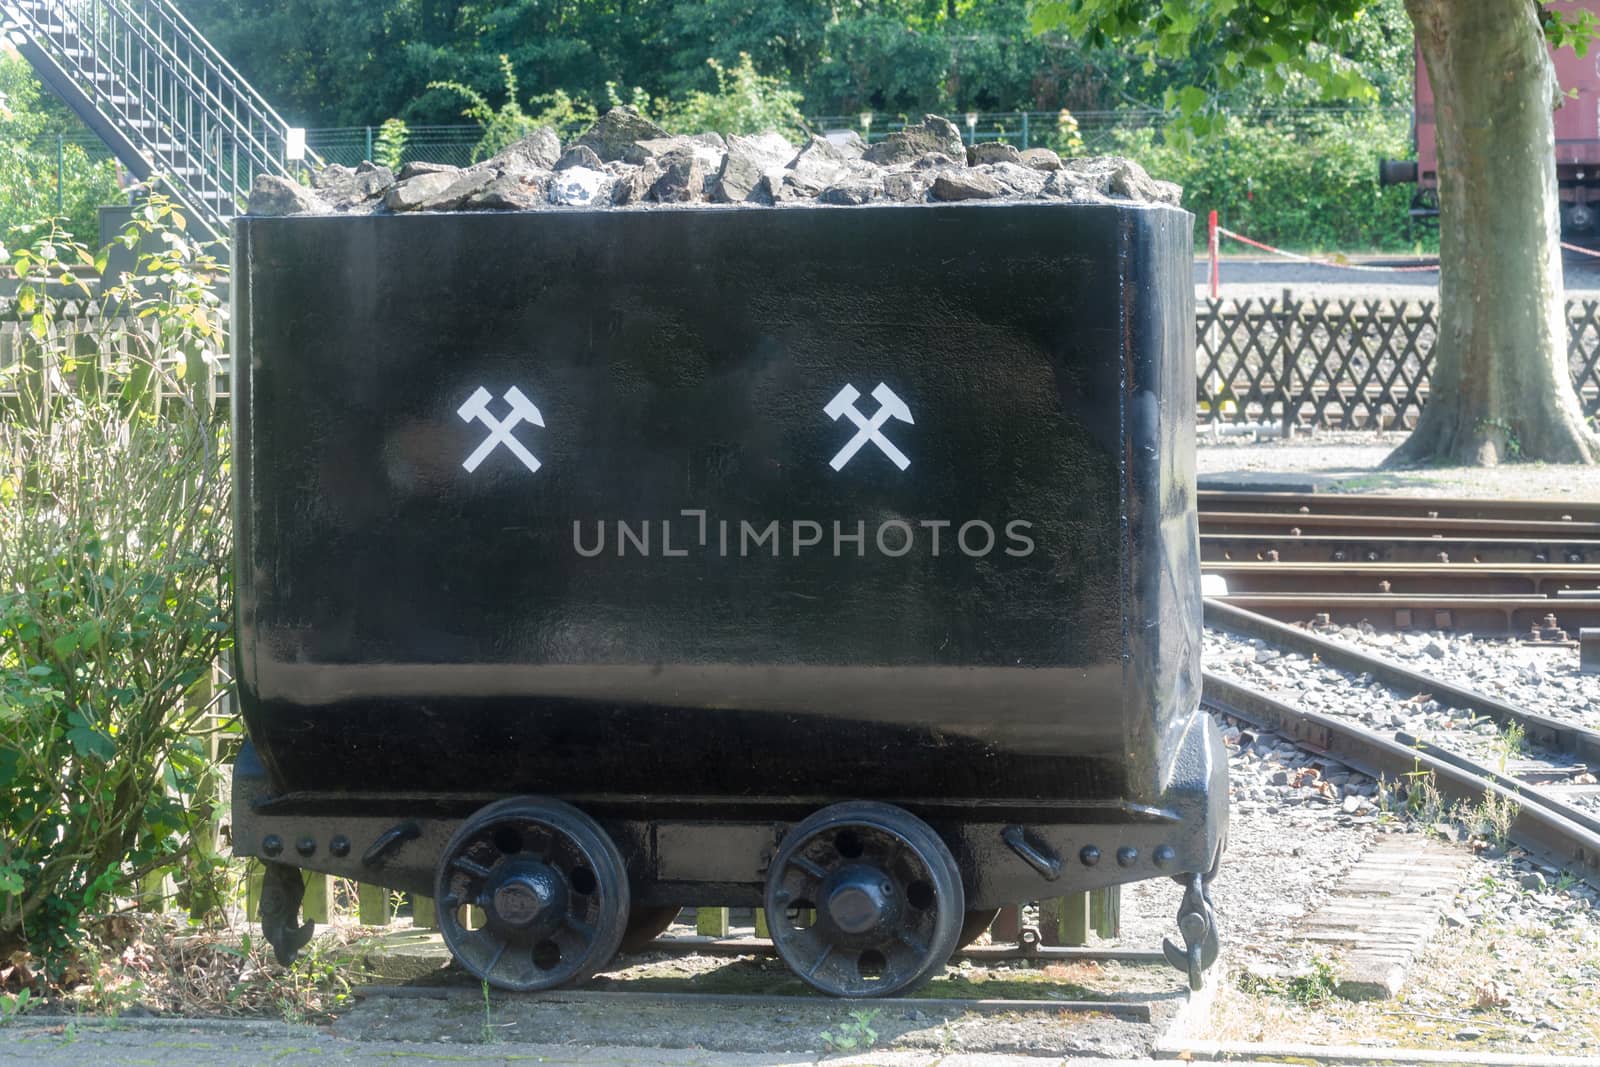  A rail vehicle used for the transport of bulk material or coal. by JFsPic